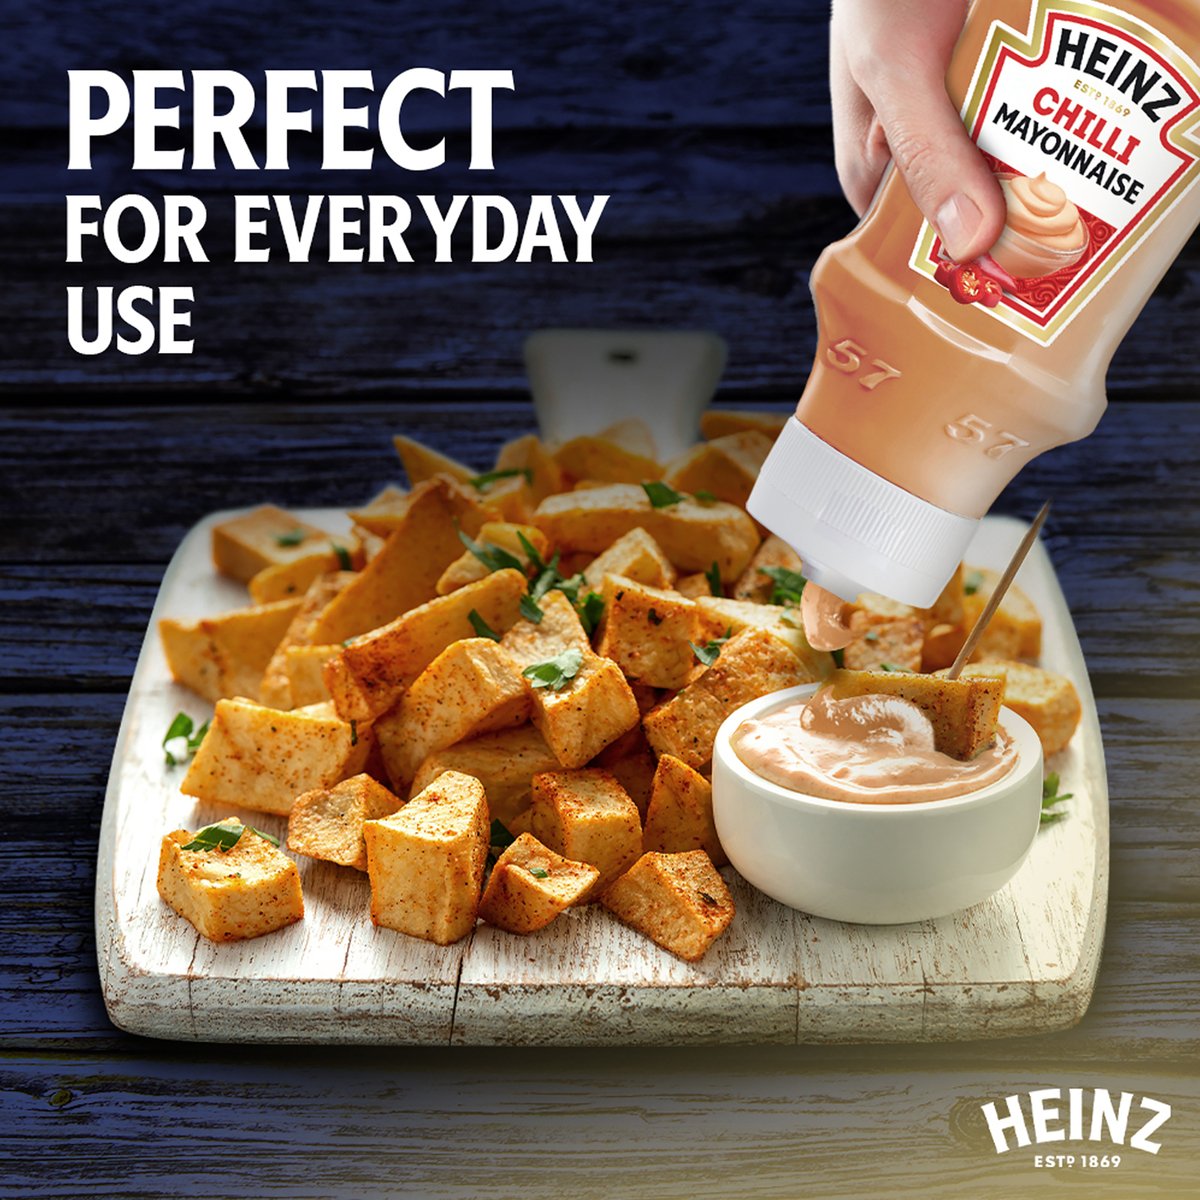 Heinz Fiery Chili Mayonnaise Top Down Squeezy Bottle 225 ml